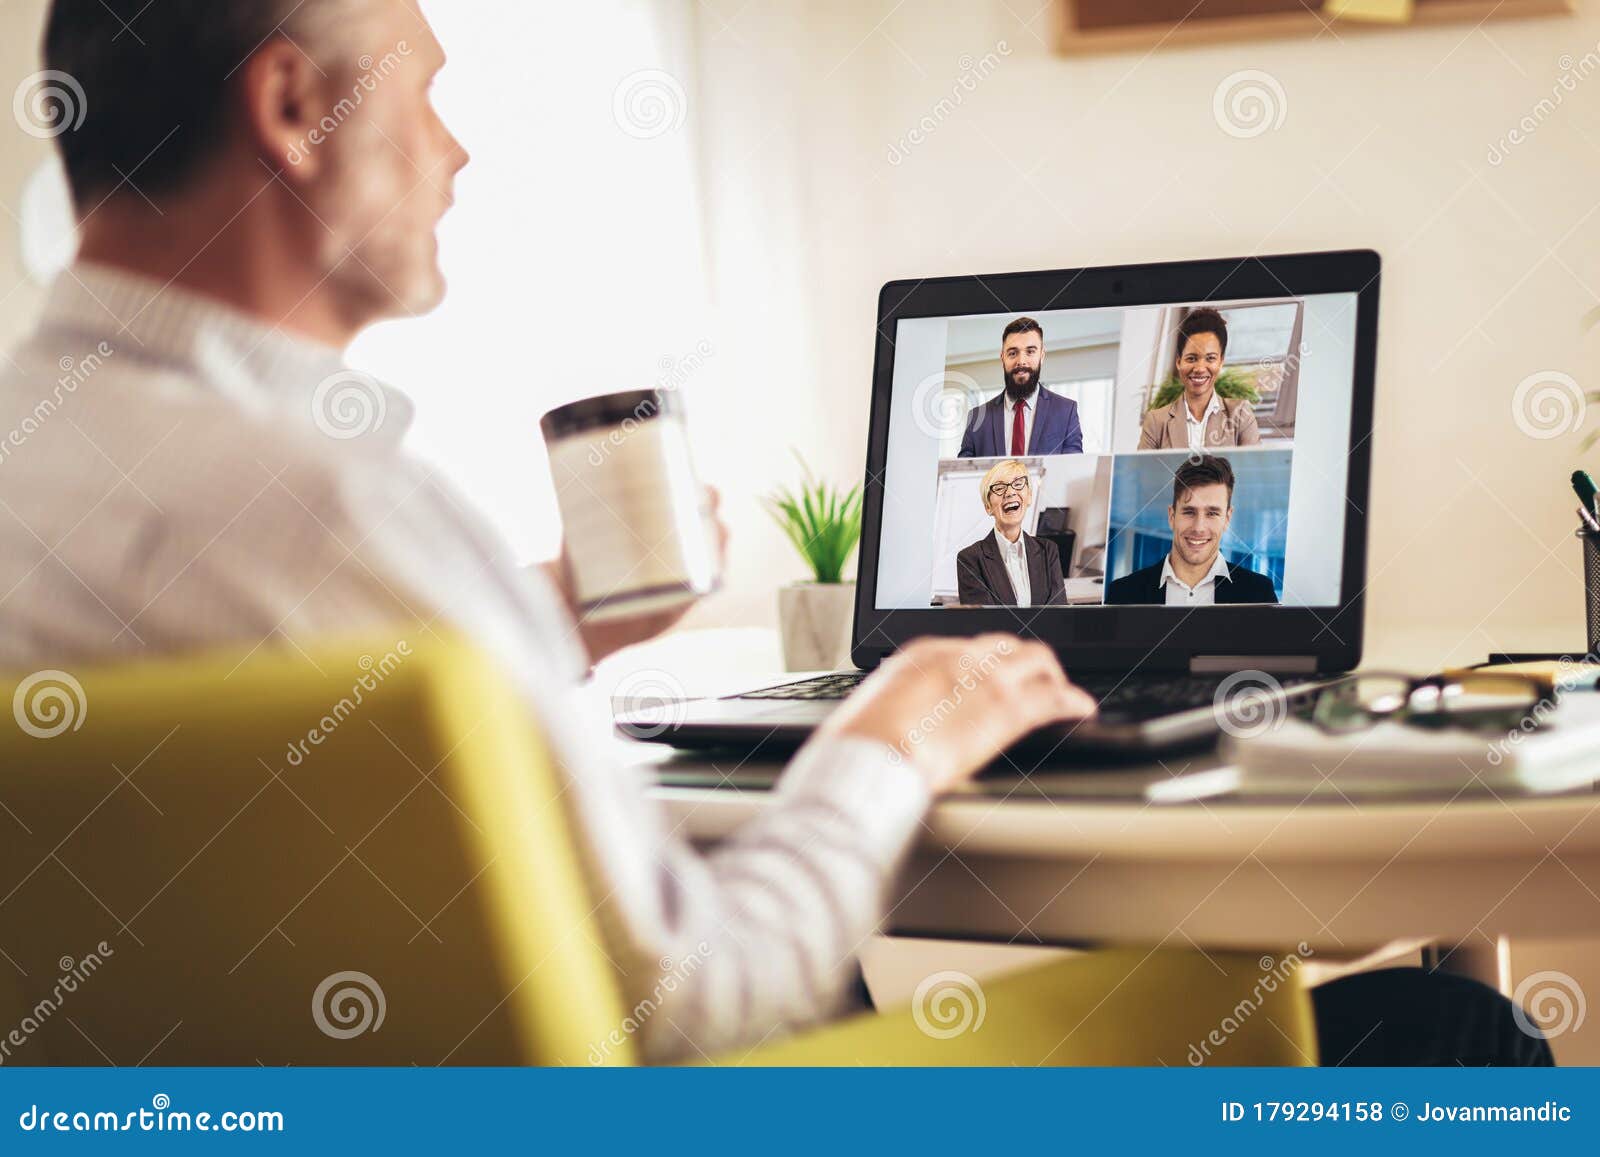 man working from home having online group videoconference